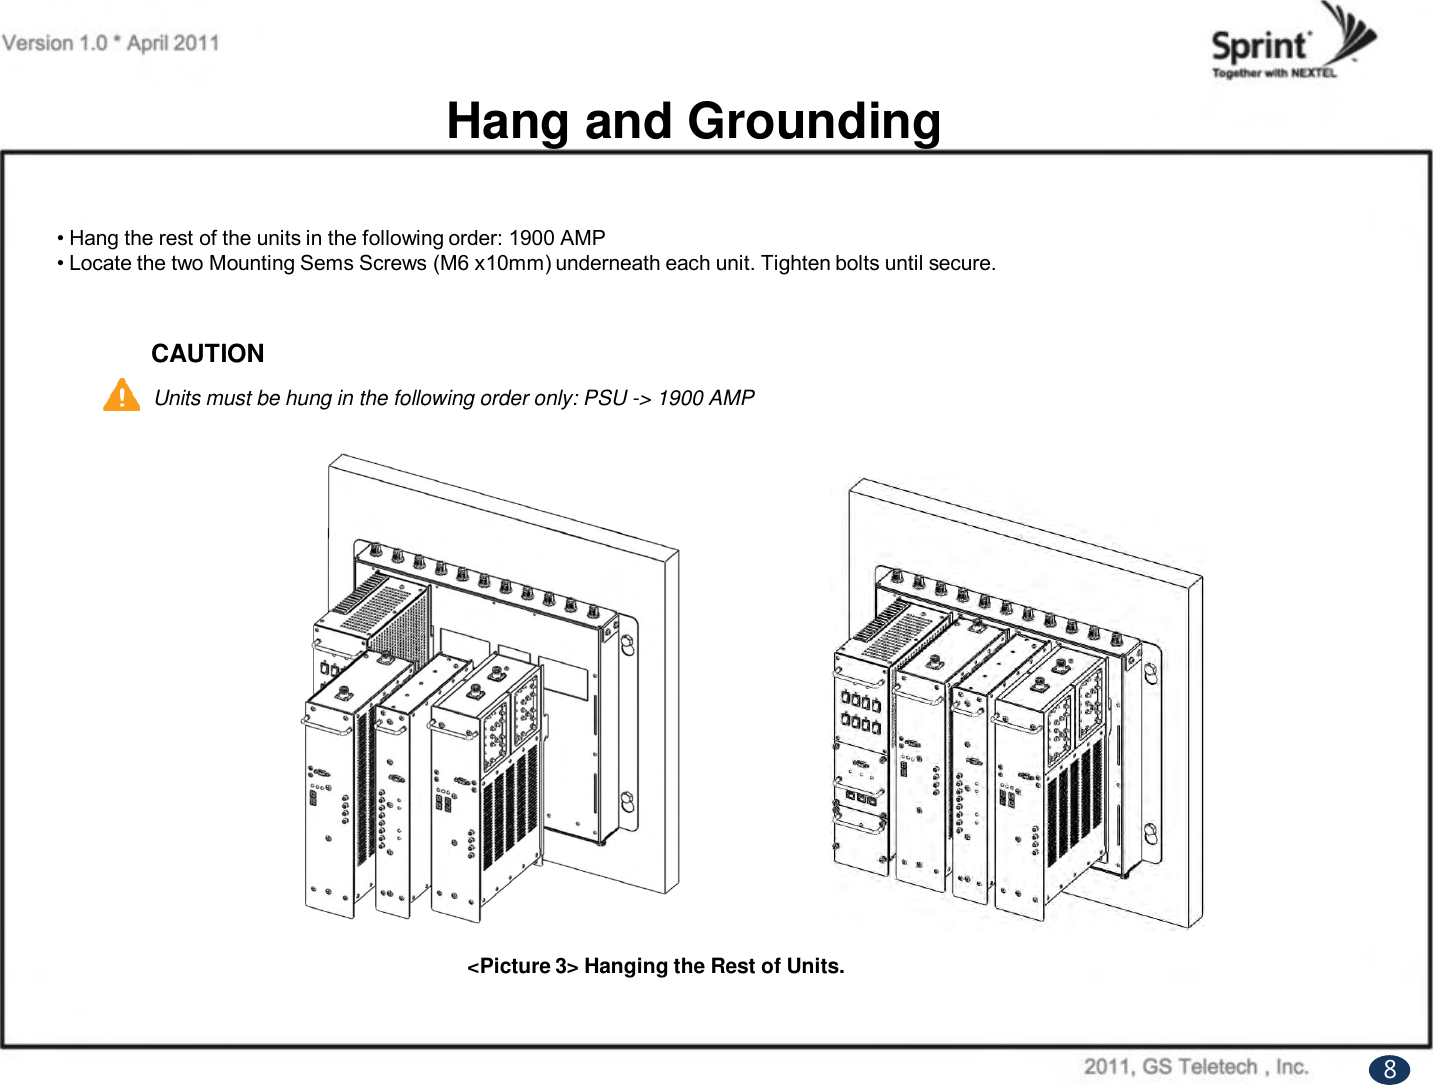 Hang and Grounding• Hang the rest of the units in the following order: 1900 AMP• Locate the two Mounting Sems Screws (M6 x10mm) underneath each unit. Tighten bolts until secure.&lt;Picture 3&gt; Hanging the Rest of Units. CAUTIONUnits must be hung in the following order only: PSU -&gt; 1900 AMP 8